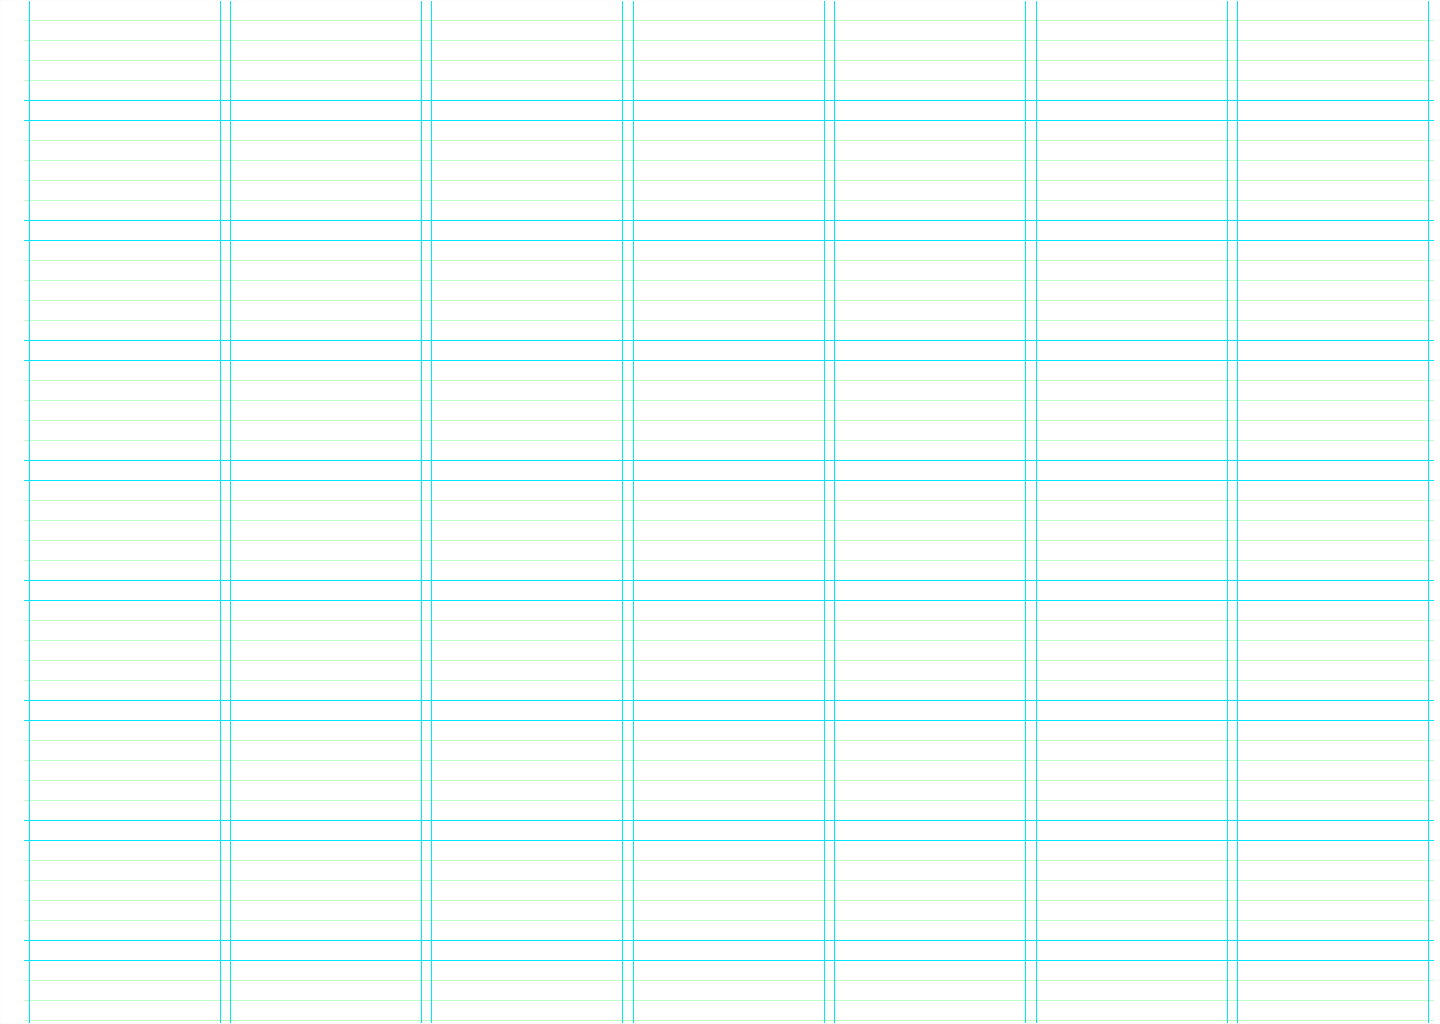 The seven column grid in use for the first anthologies.co concepts. It's slightly off center to the right. The gap on the left gives room for the branding banner.